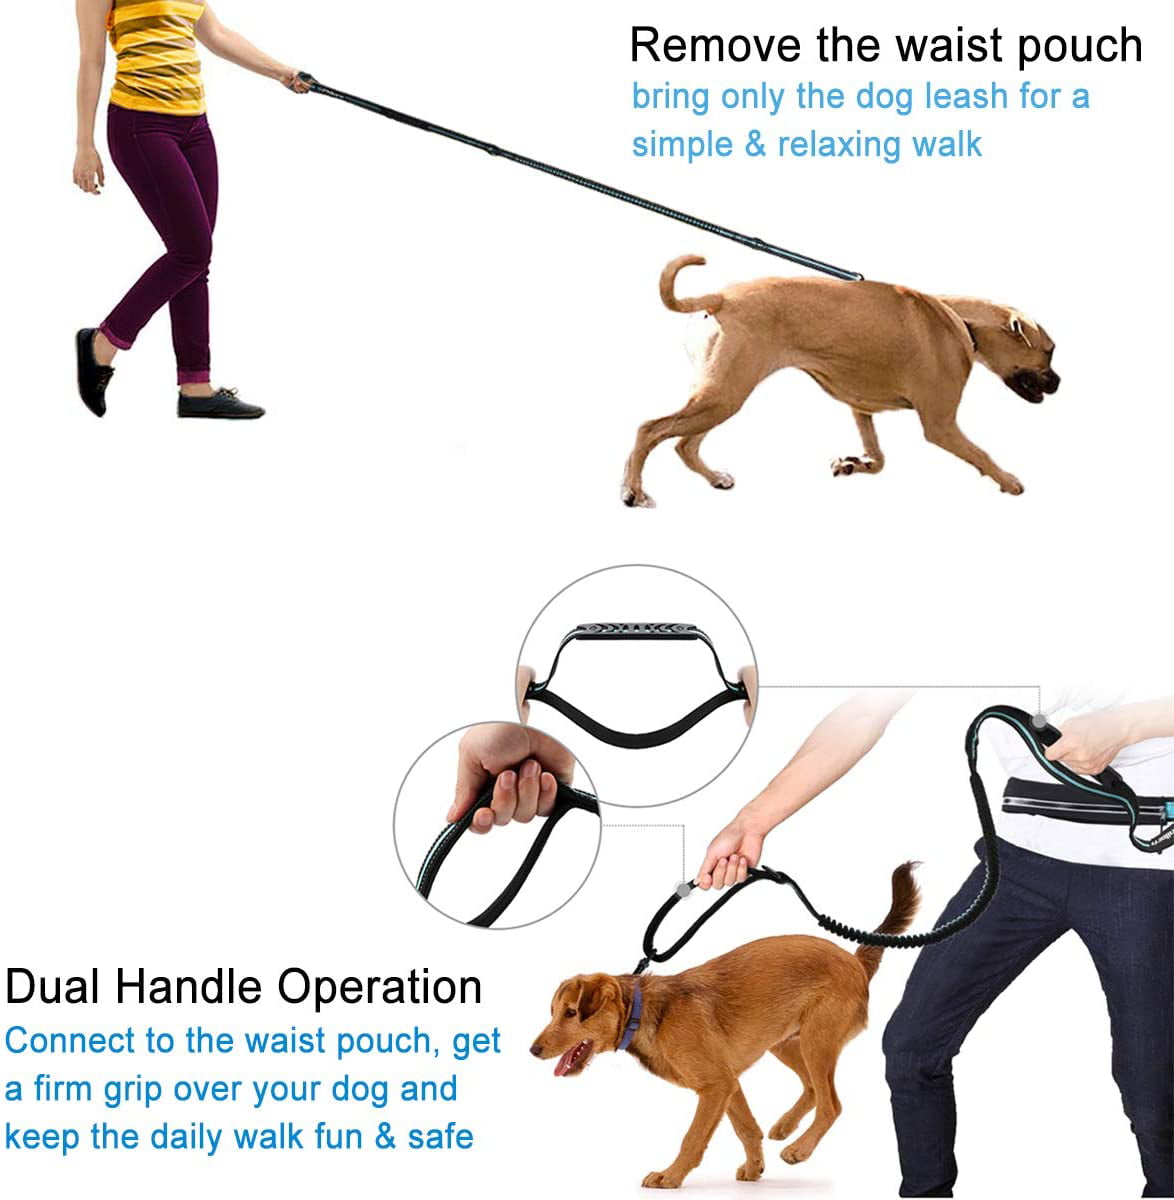 47-67 Extendable Reflective Stitching Adjustable Waist Belt Shock Absorbing Dual Handle Bungee 24-47 Endure 150lbs Dog Leash for Running/Jogging Philorn Hands Free Dog Lead with Phone Pouch